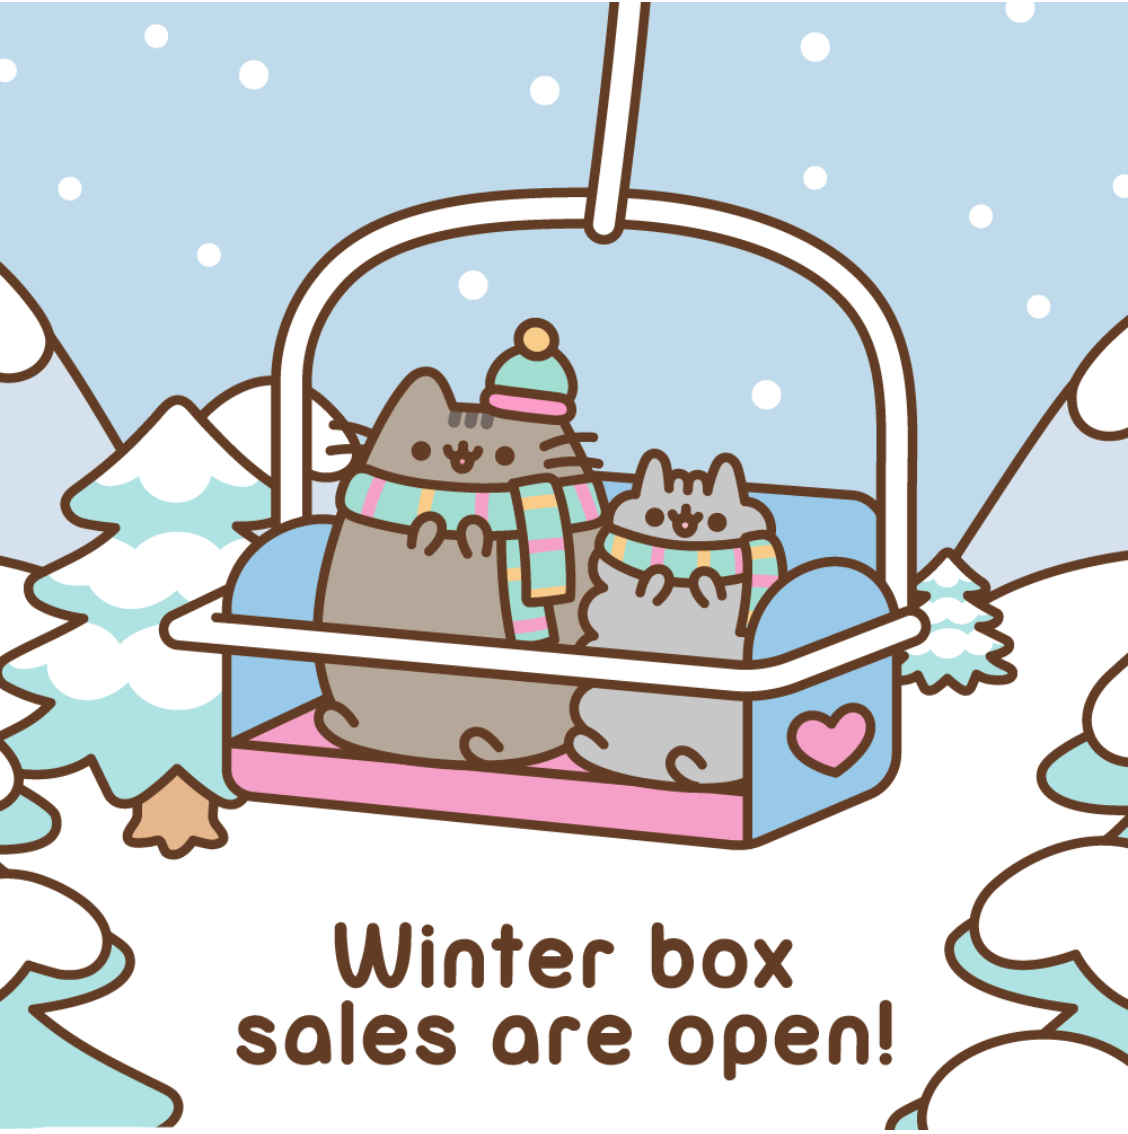 Pusheen Box Cyber Monday Deal – 25% Off Your First Box!